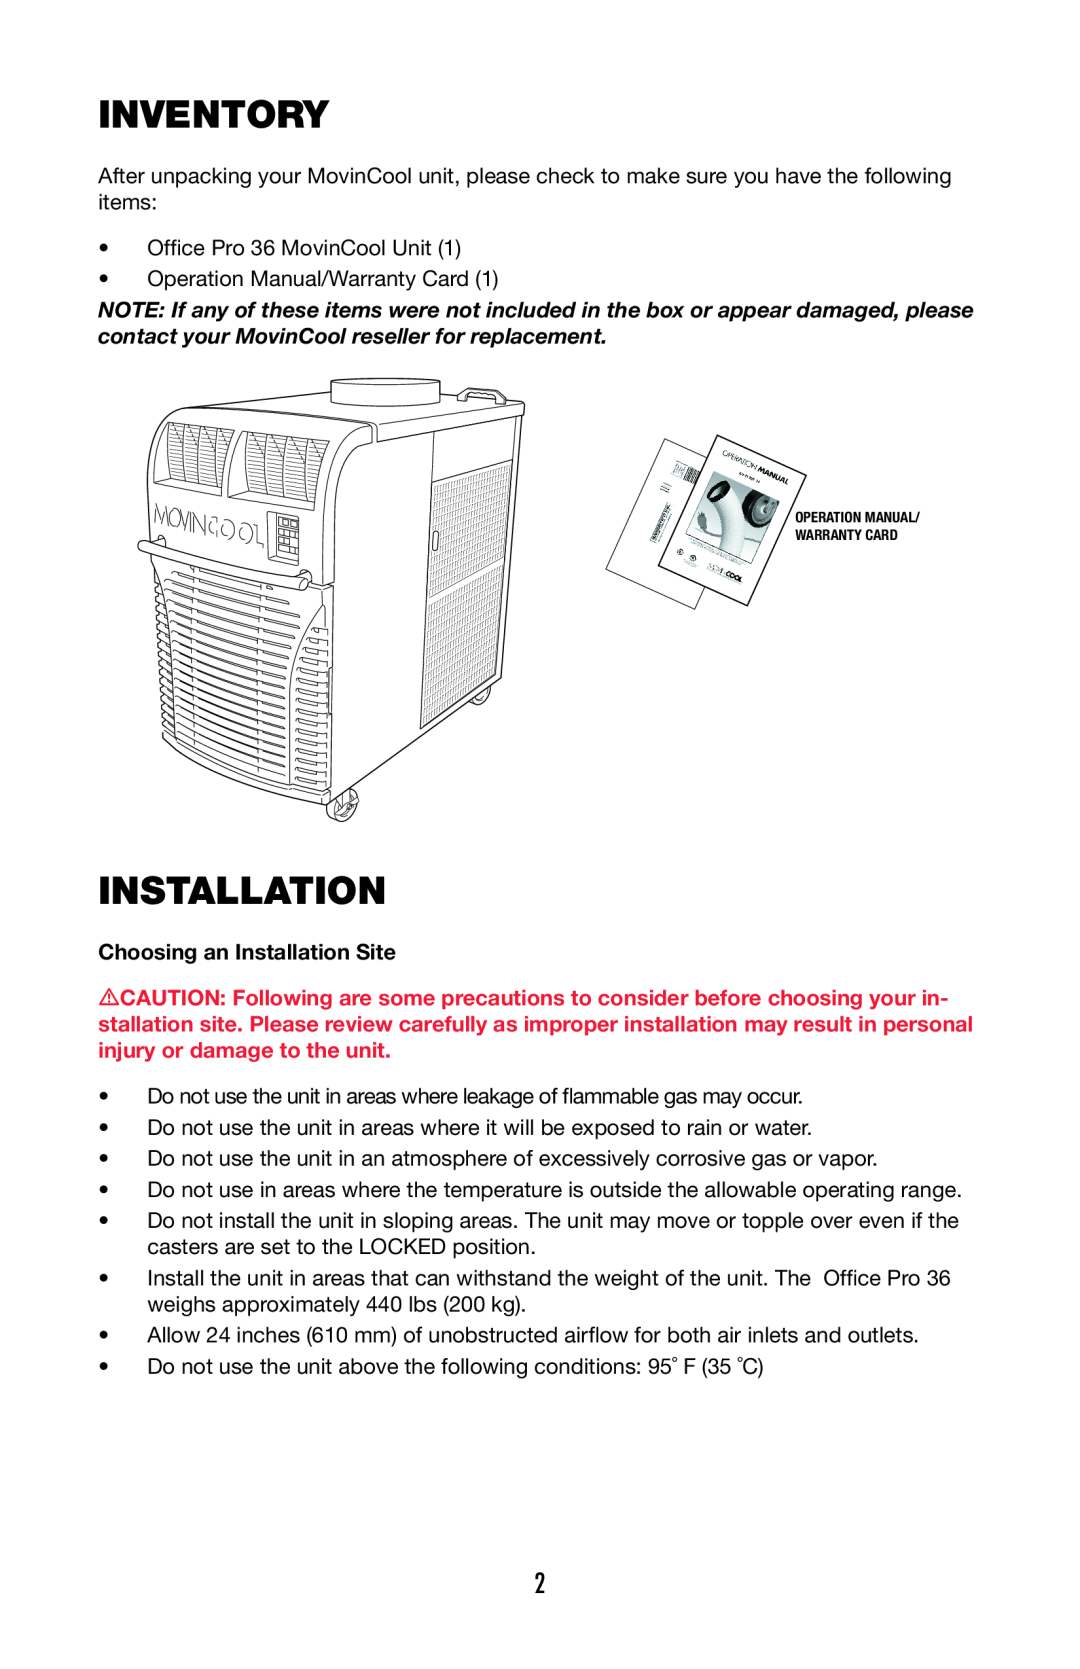 Denso 36 operation manual Inventory, Choosing an Installation Site 